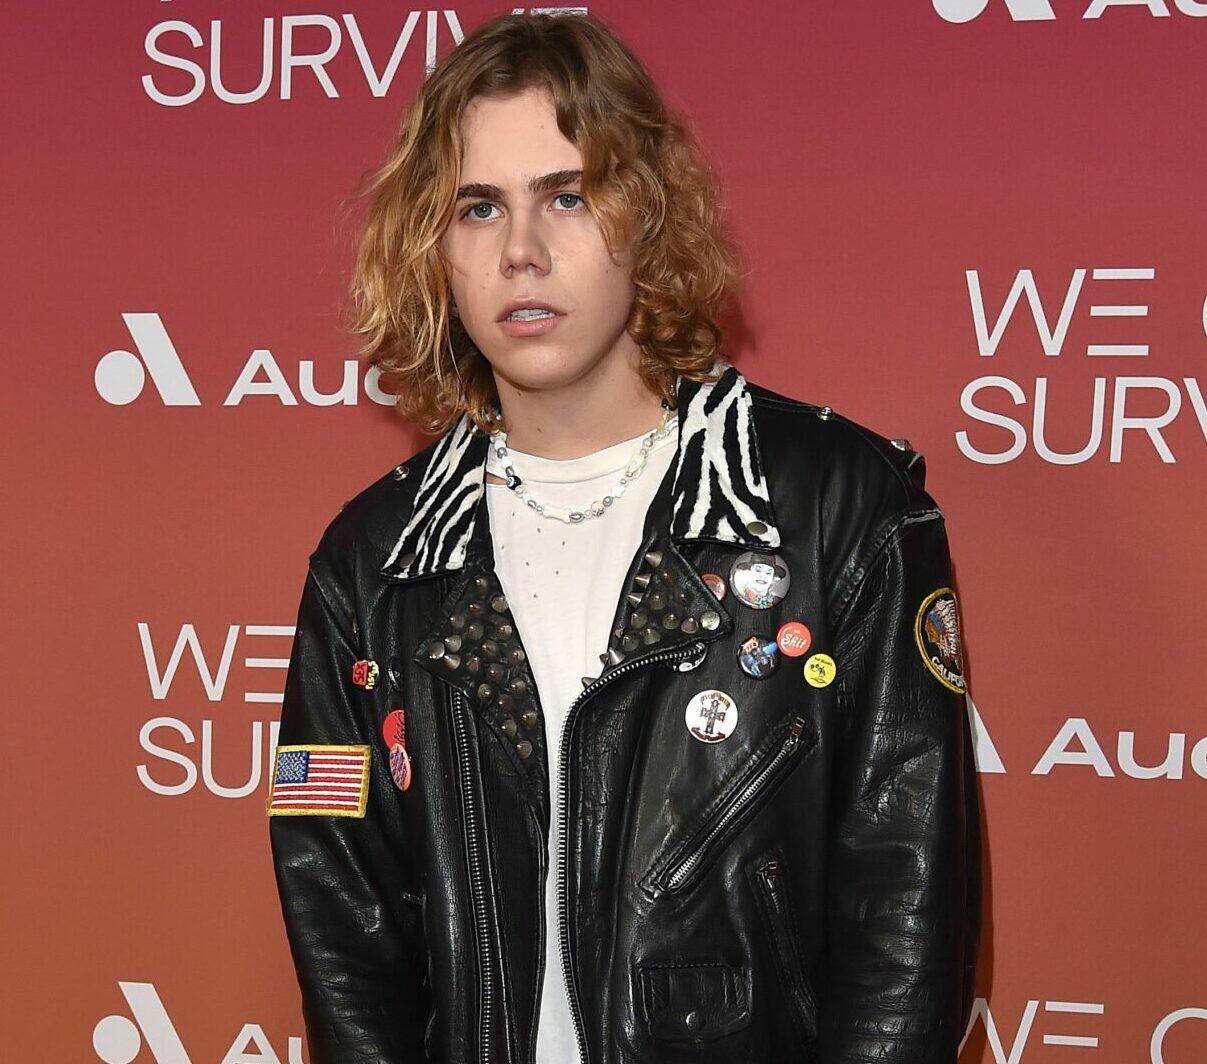 Audacy Hosts 8th Annual "We Can Survive" Concert. Hollywood Bowl, Los Angeles, CA. 23 Oct 2021 Pictured: The Kid Laroi.